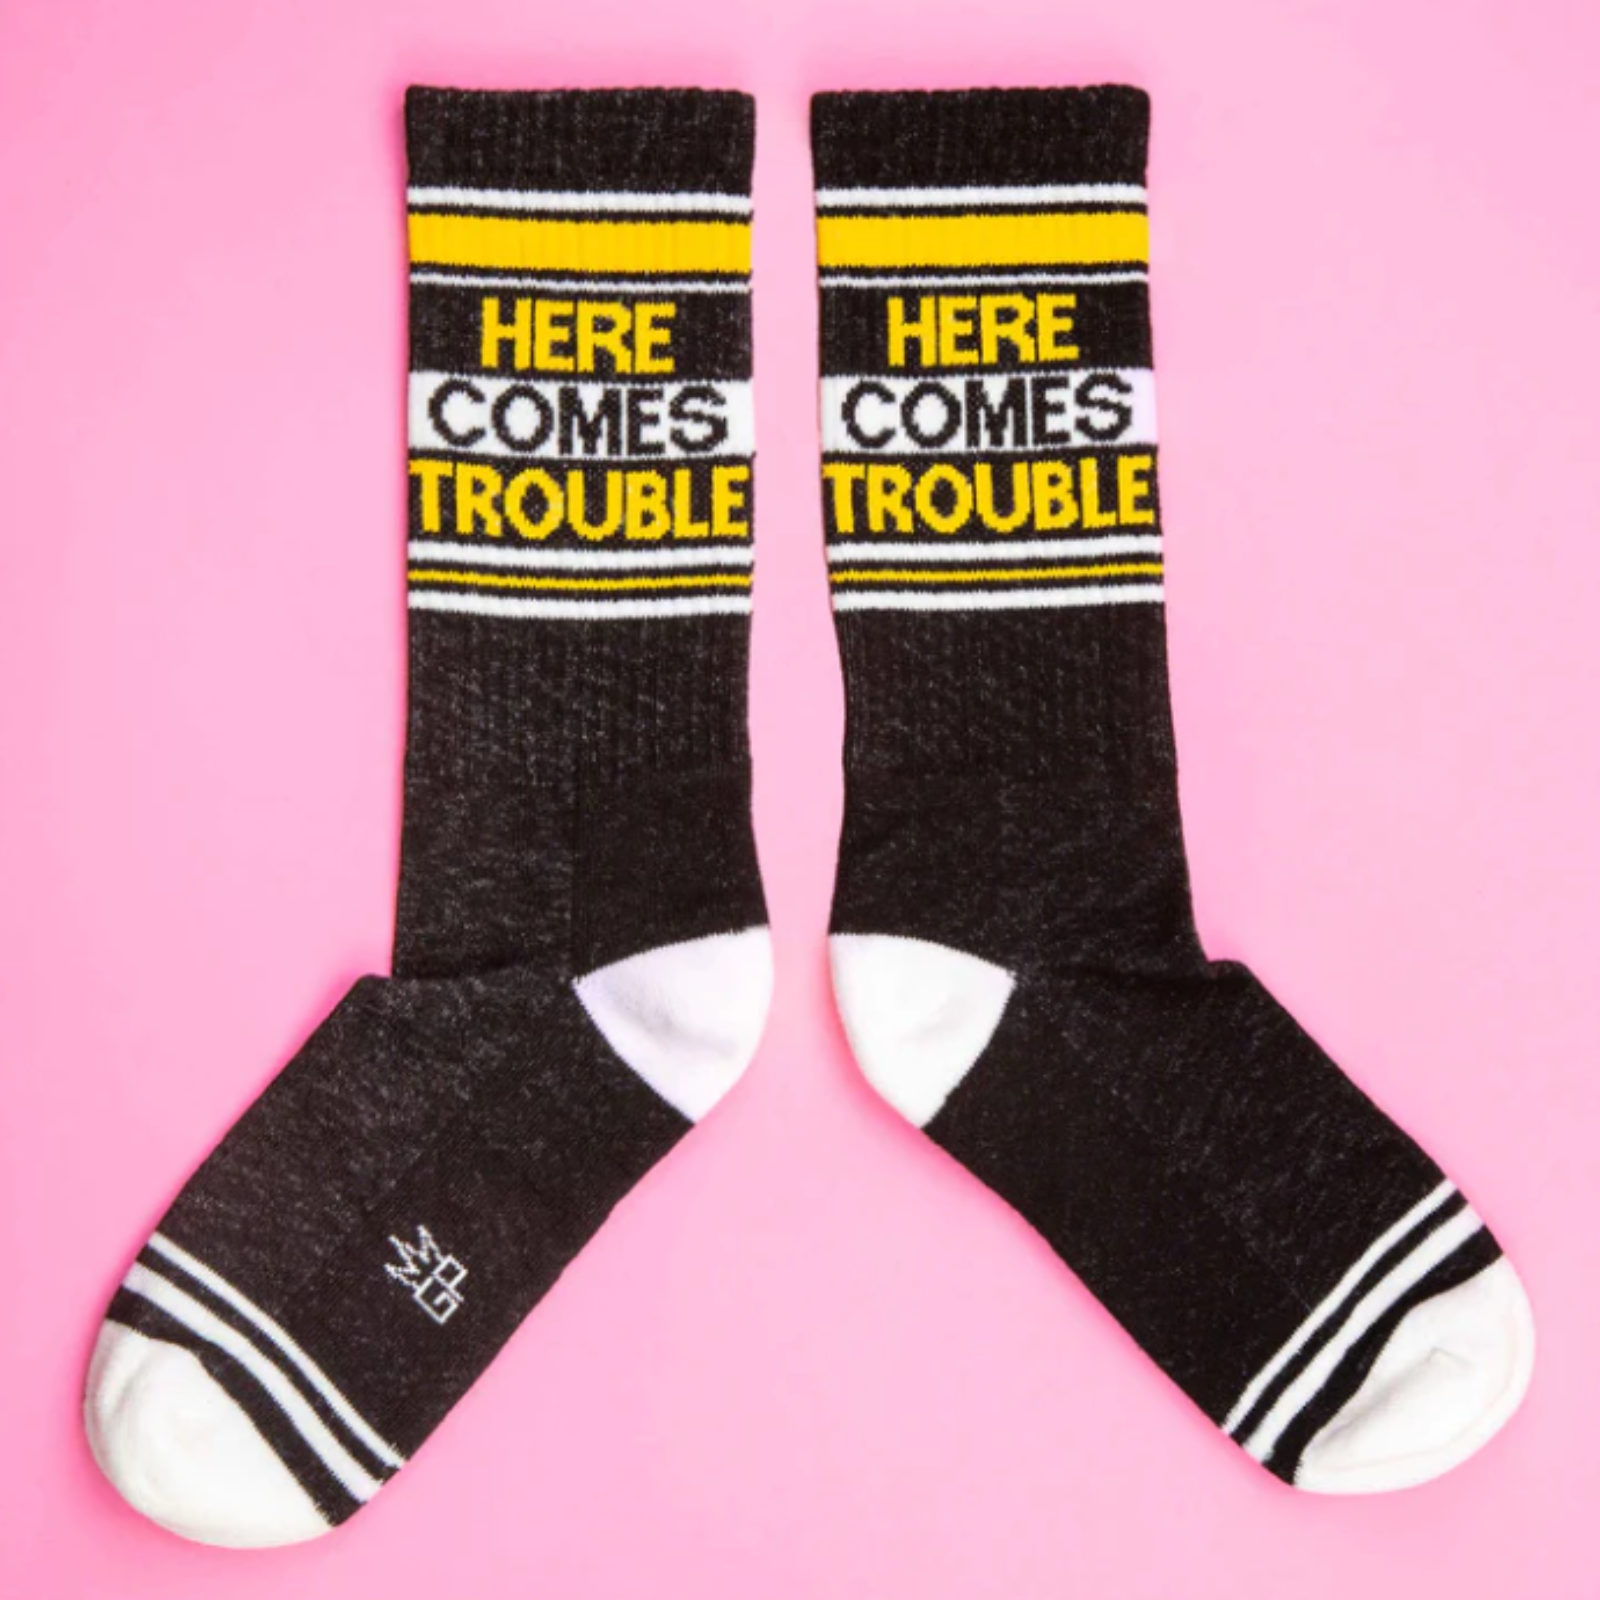 Gumball Poodle Here Comes Trouble women's and men's sock featuring black sock with white and yellow "here comes trouble" in capital letters on display 